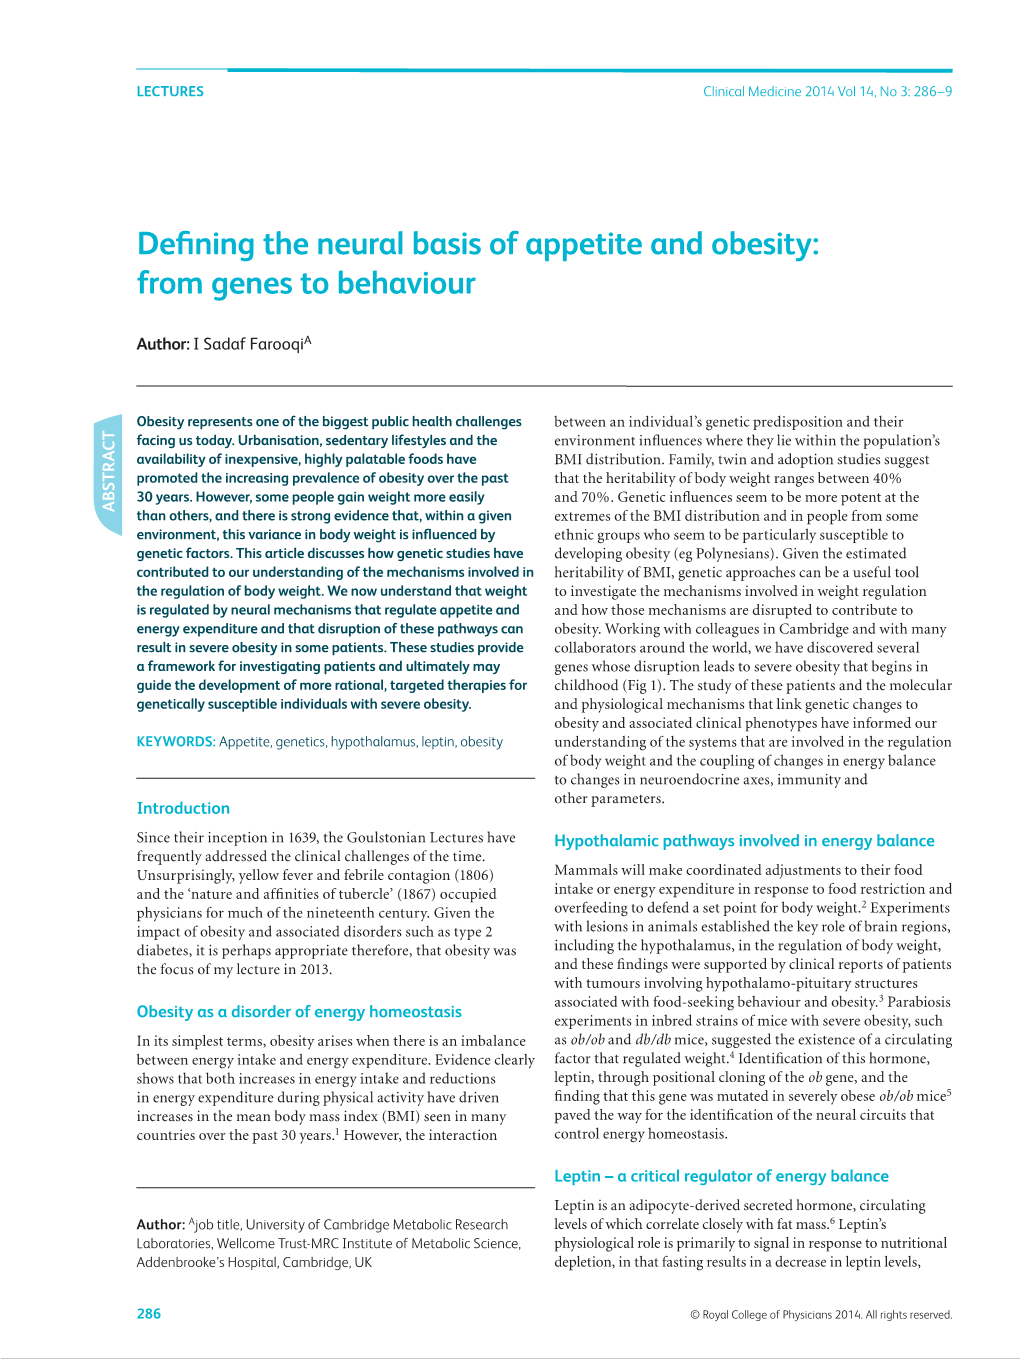 Defining the Neural Basis of Appetite and Obesity: from Genes to Behaviour